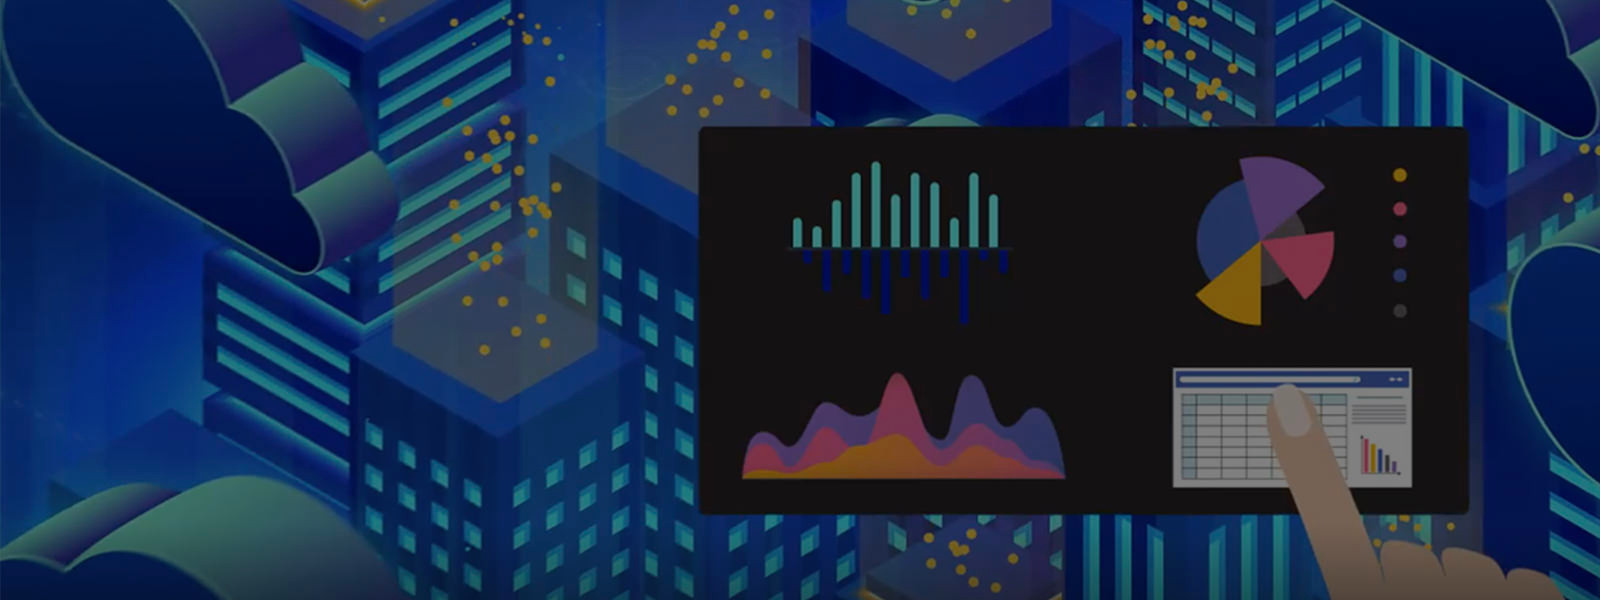 A graphical cityscape on background and a graphical representation of a touch-screen on foreground